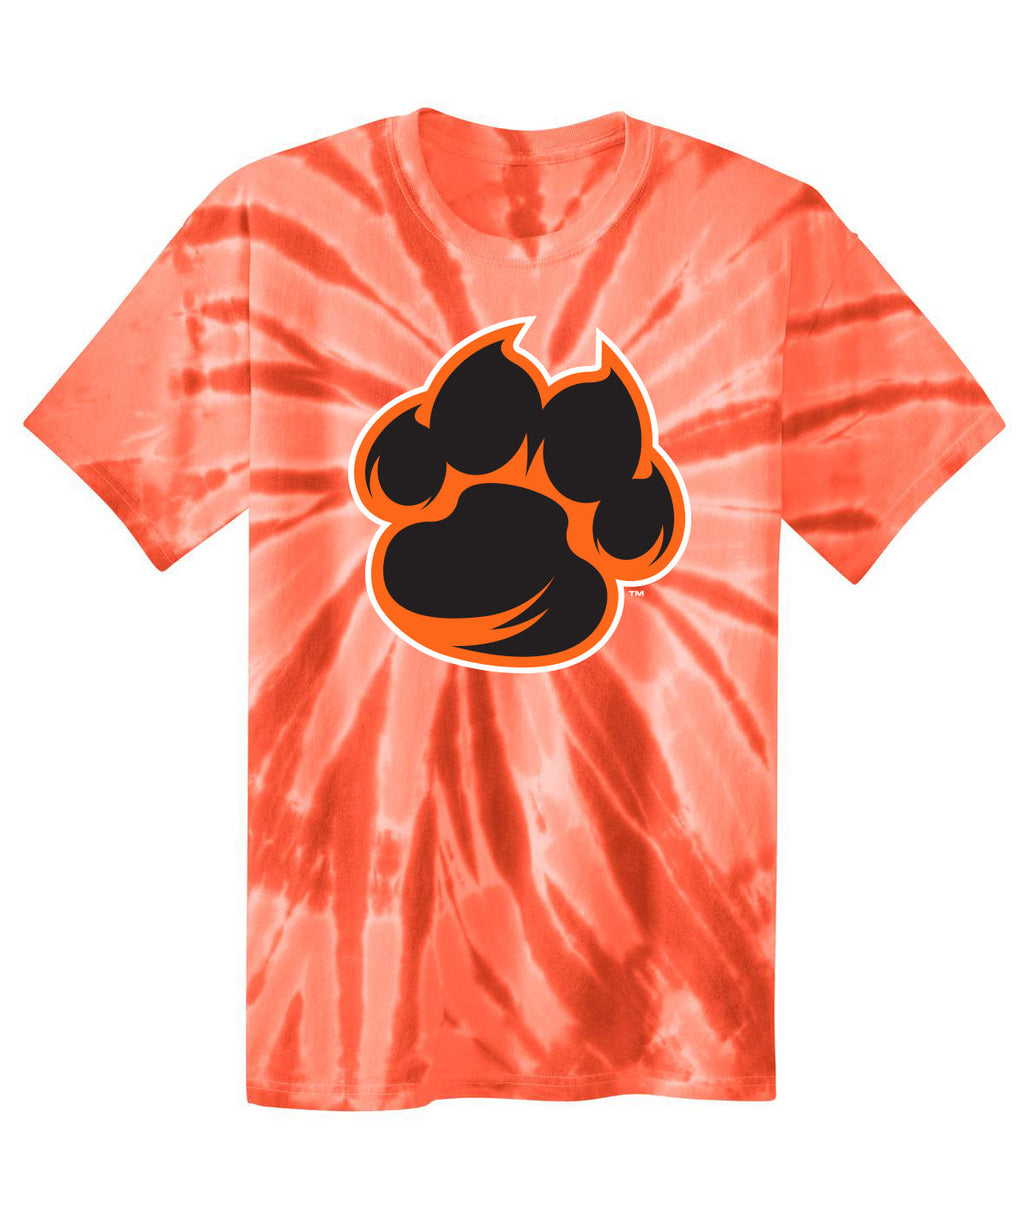 Tiger Paw Youth Tie-Dye Tee